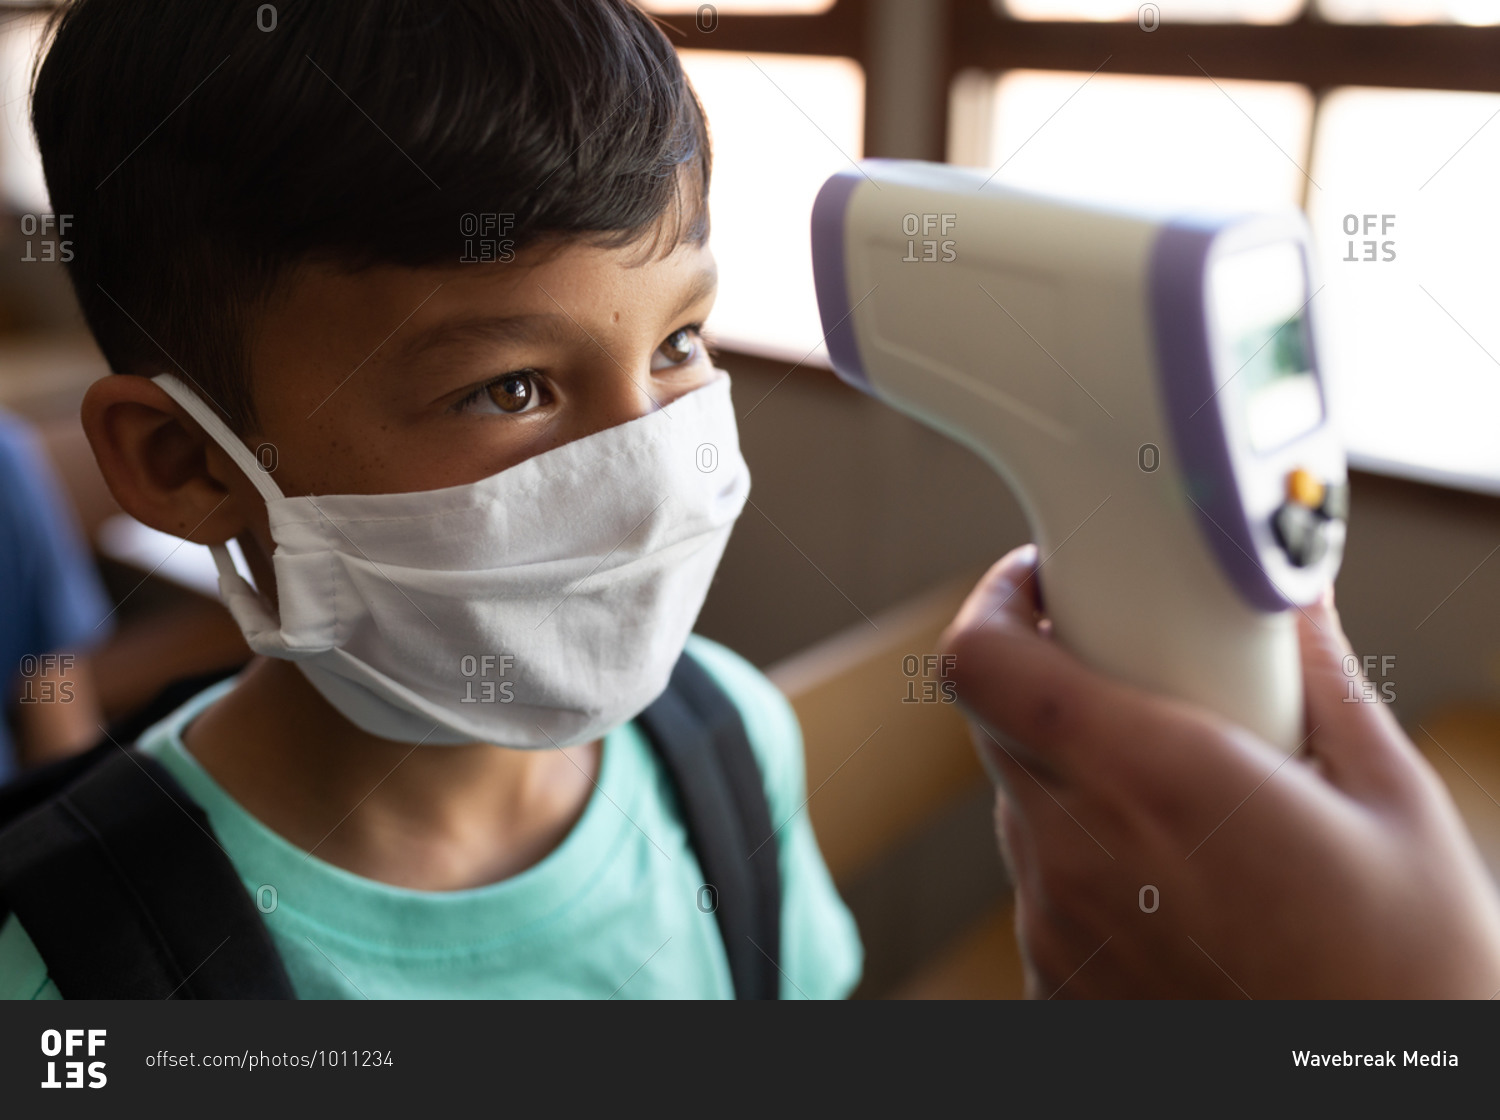 Mixed race boy wearing face mask getting his temperature measured in an elementary school. Primary education social distancing health safety during Covid19 Coronavirus pandemic.